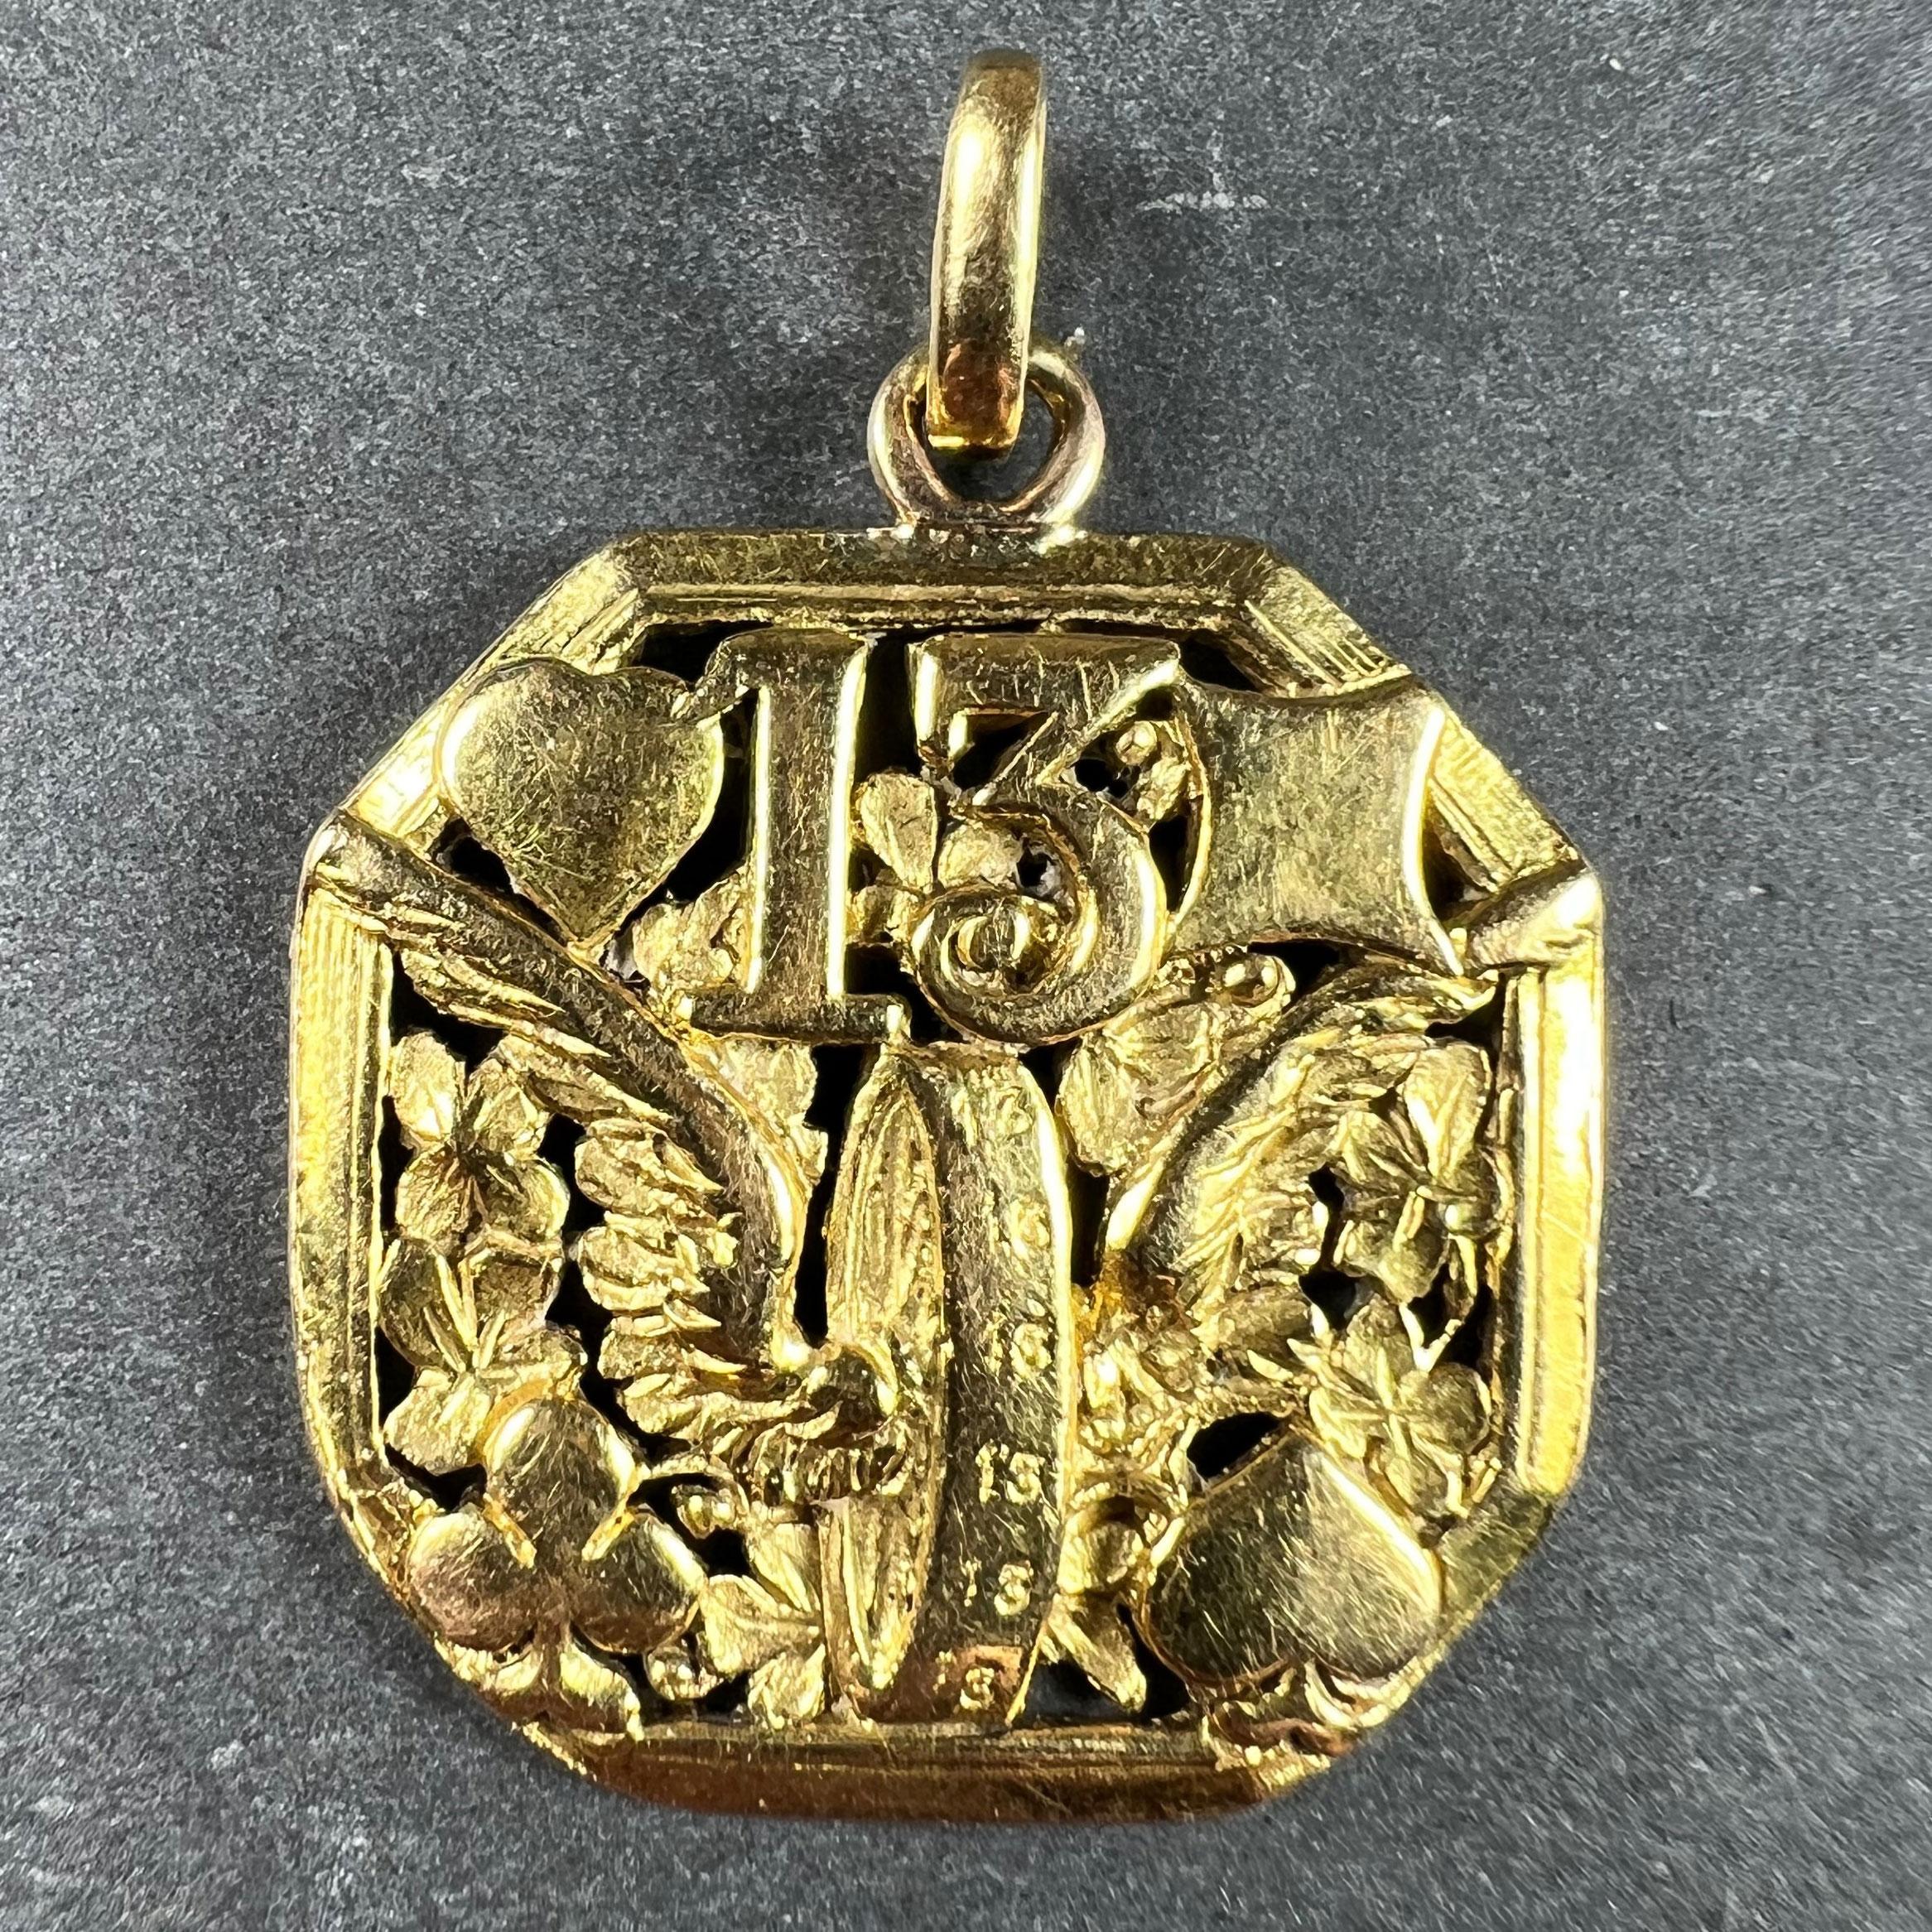 An extraordinary, large French 18 karat (18K) yellow gold lucky charm pendant designed as a pierced octahedron with multiple symbols for good luck, centring on the winged wheel of Hermes, which has the number 13 engraved multiple times on the tread